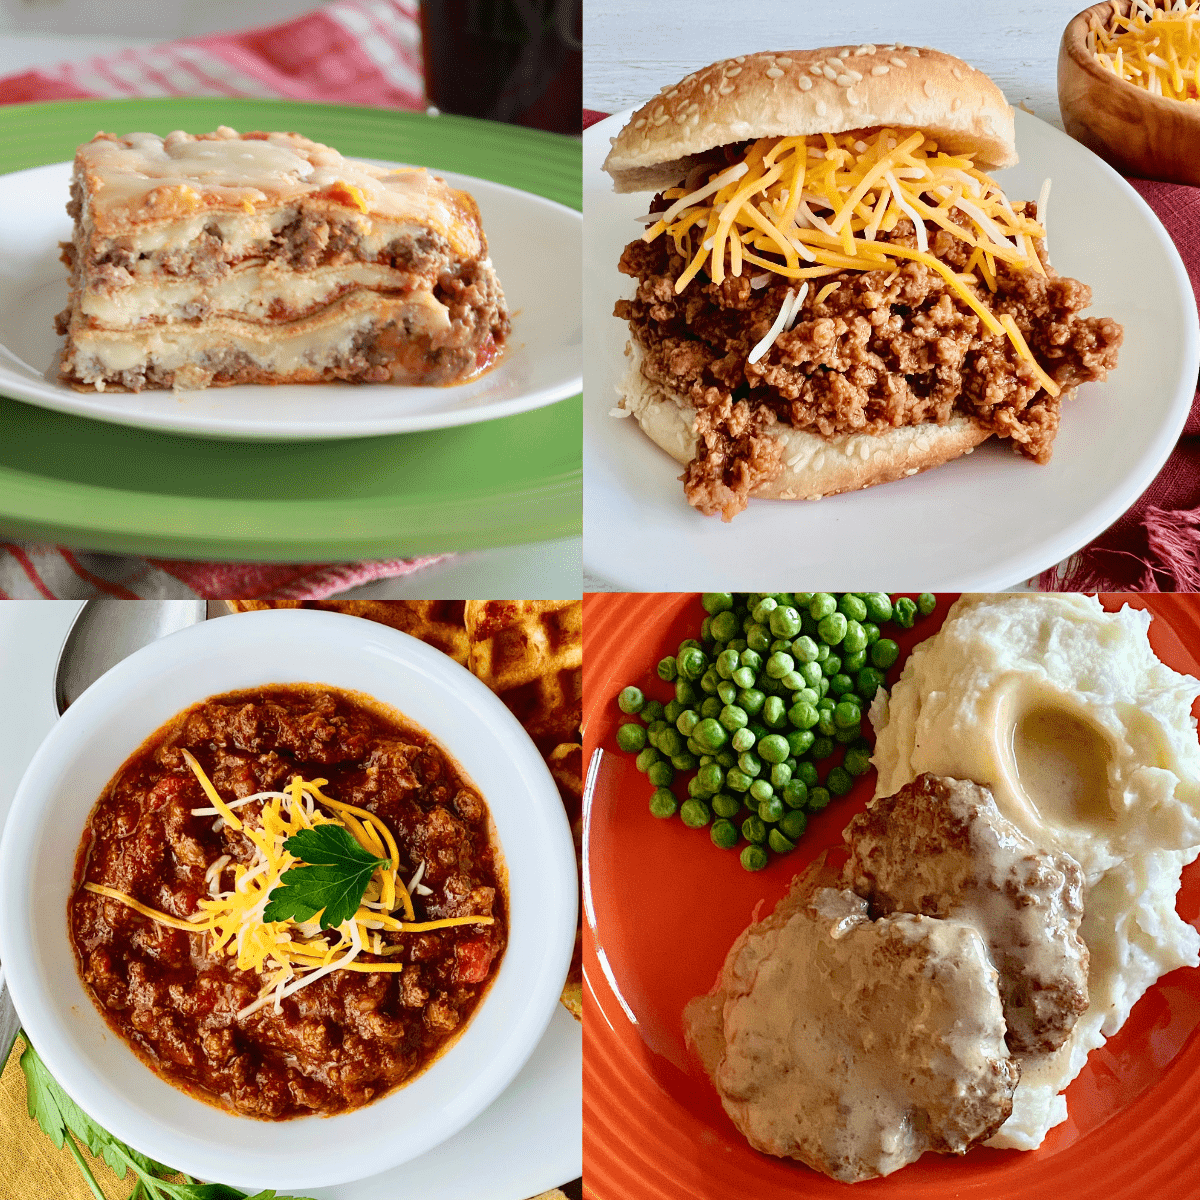 Pictures of lasagna, sloppy joes, chili, and salisbury steak.